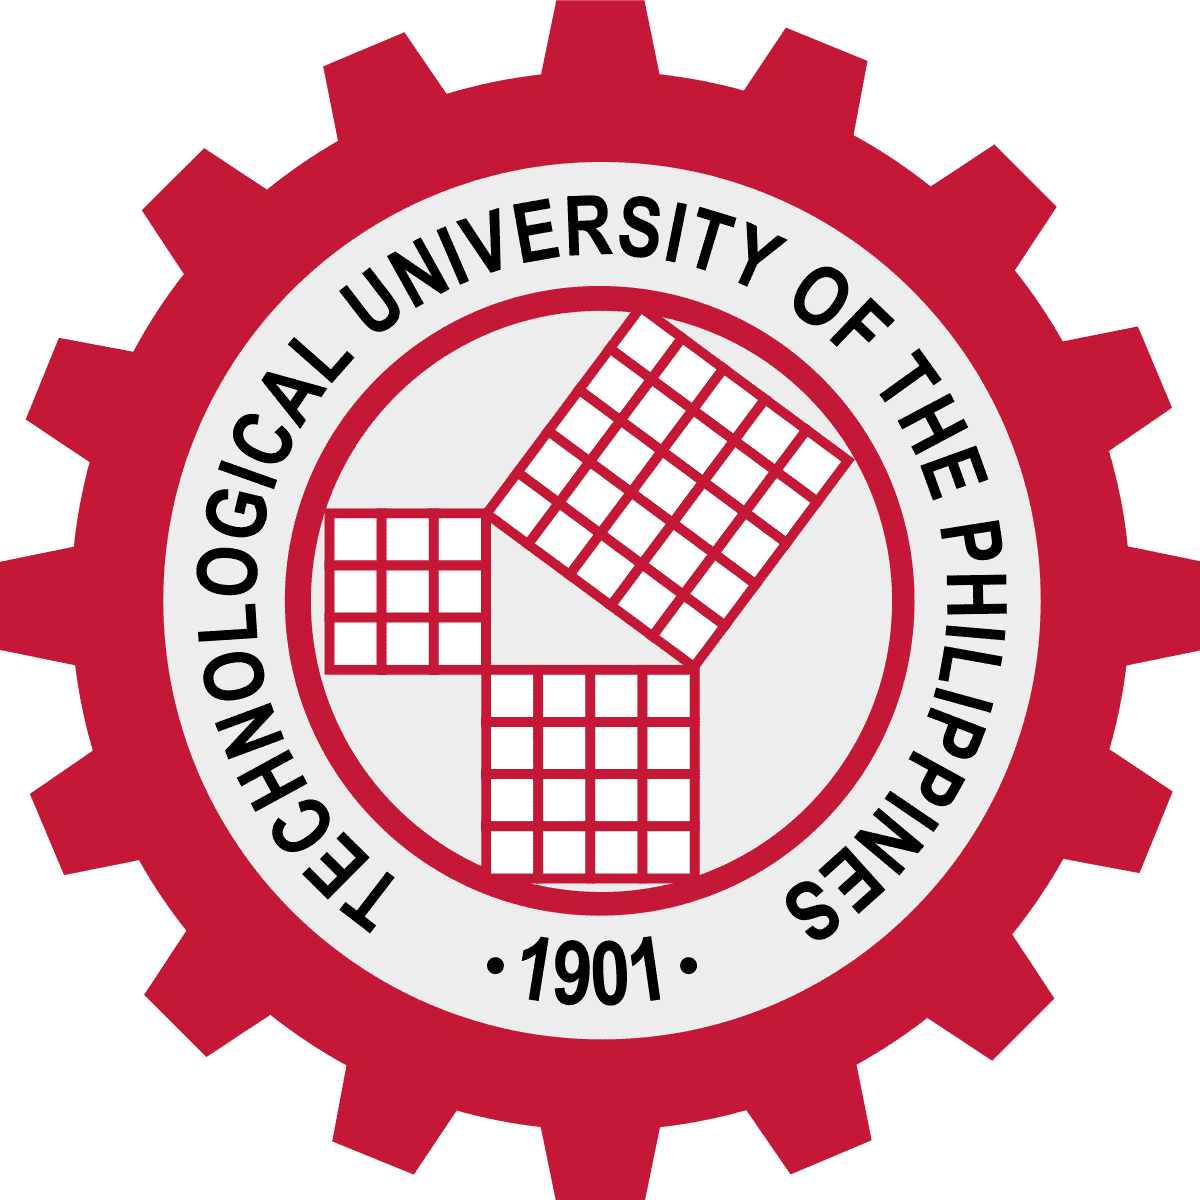 Technological_University_of_the_Philippines_Seal.svg.png